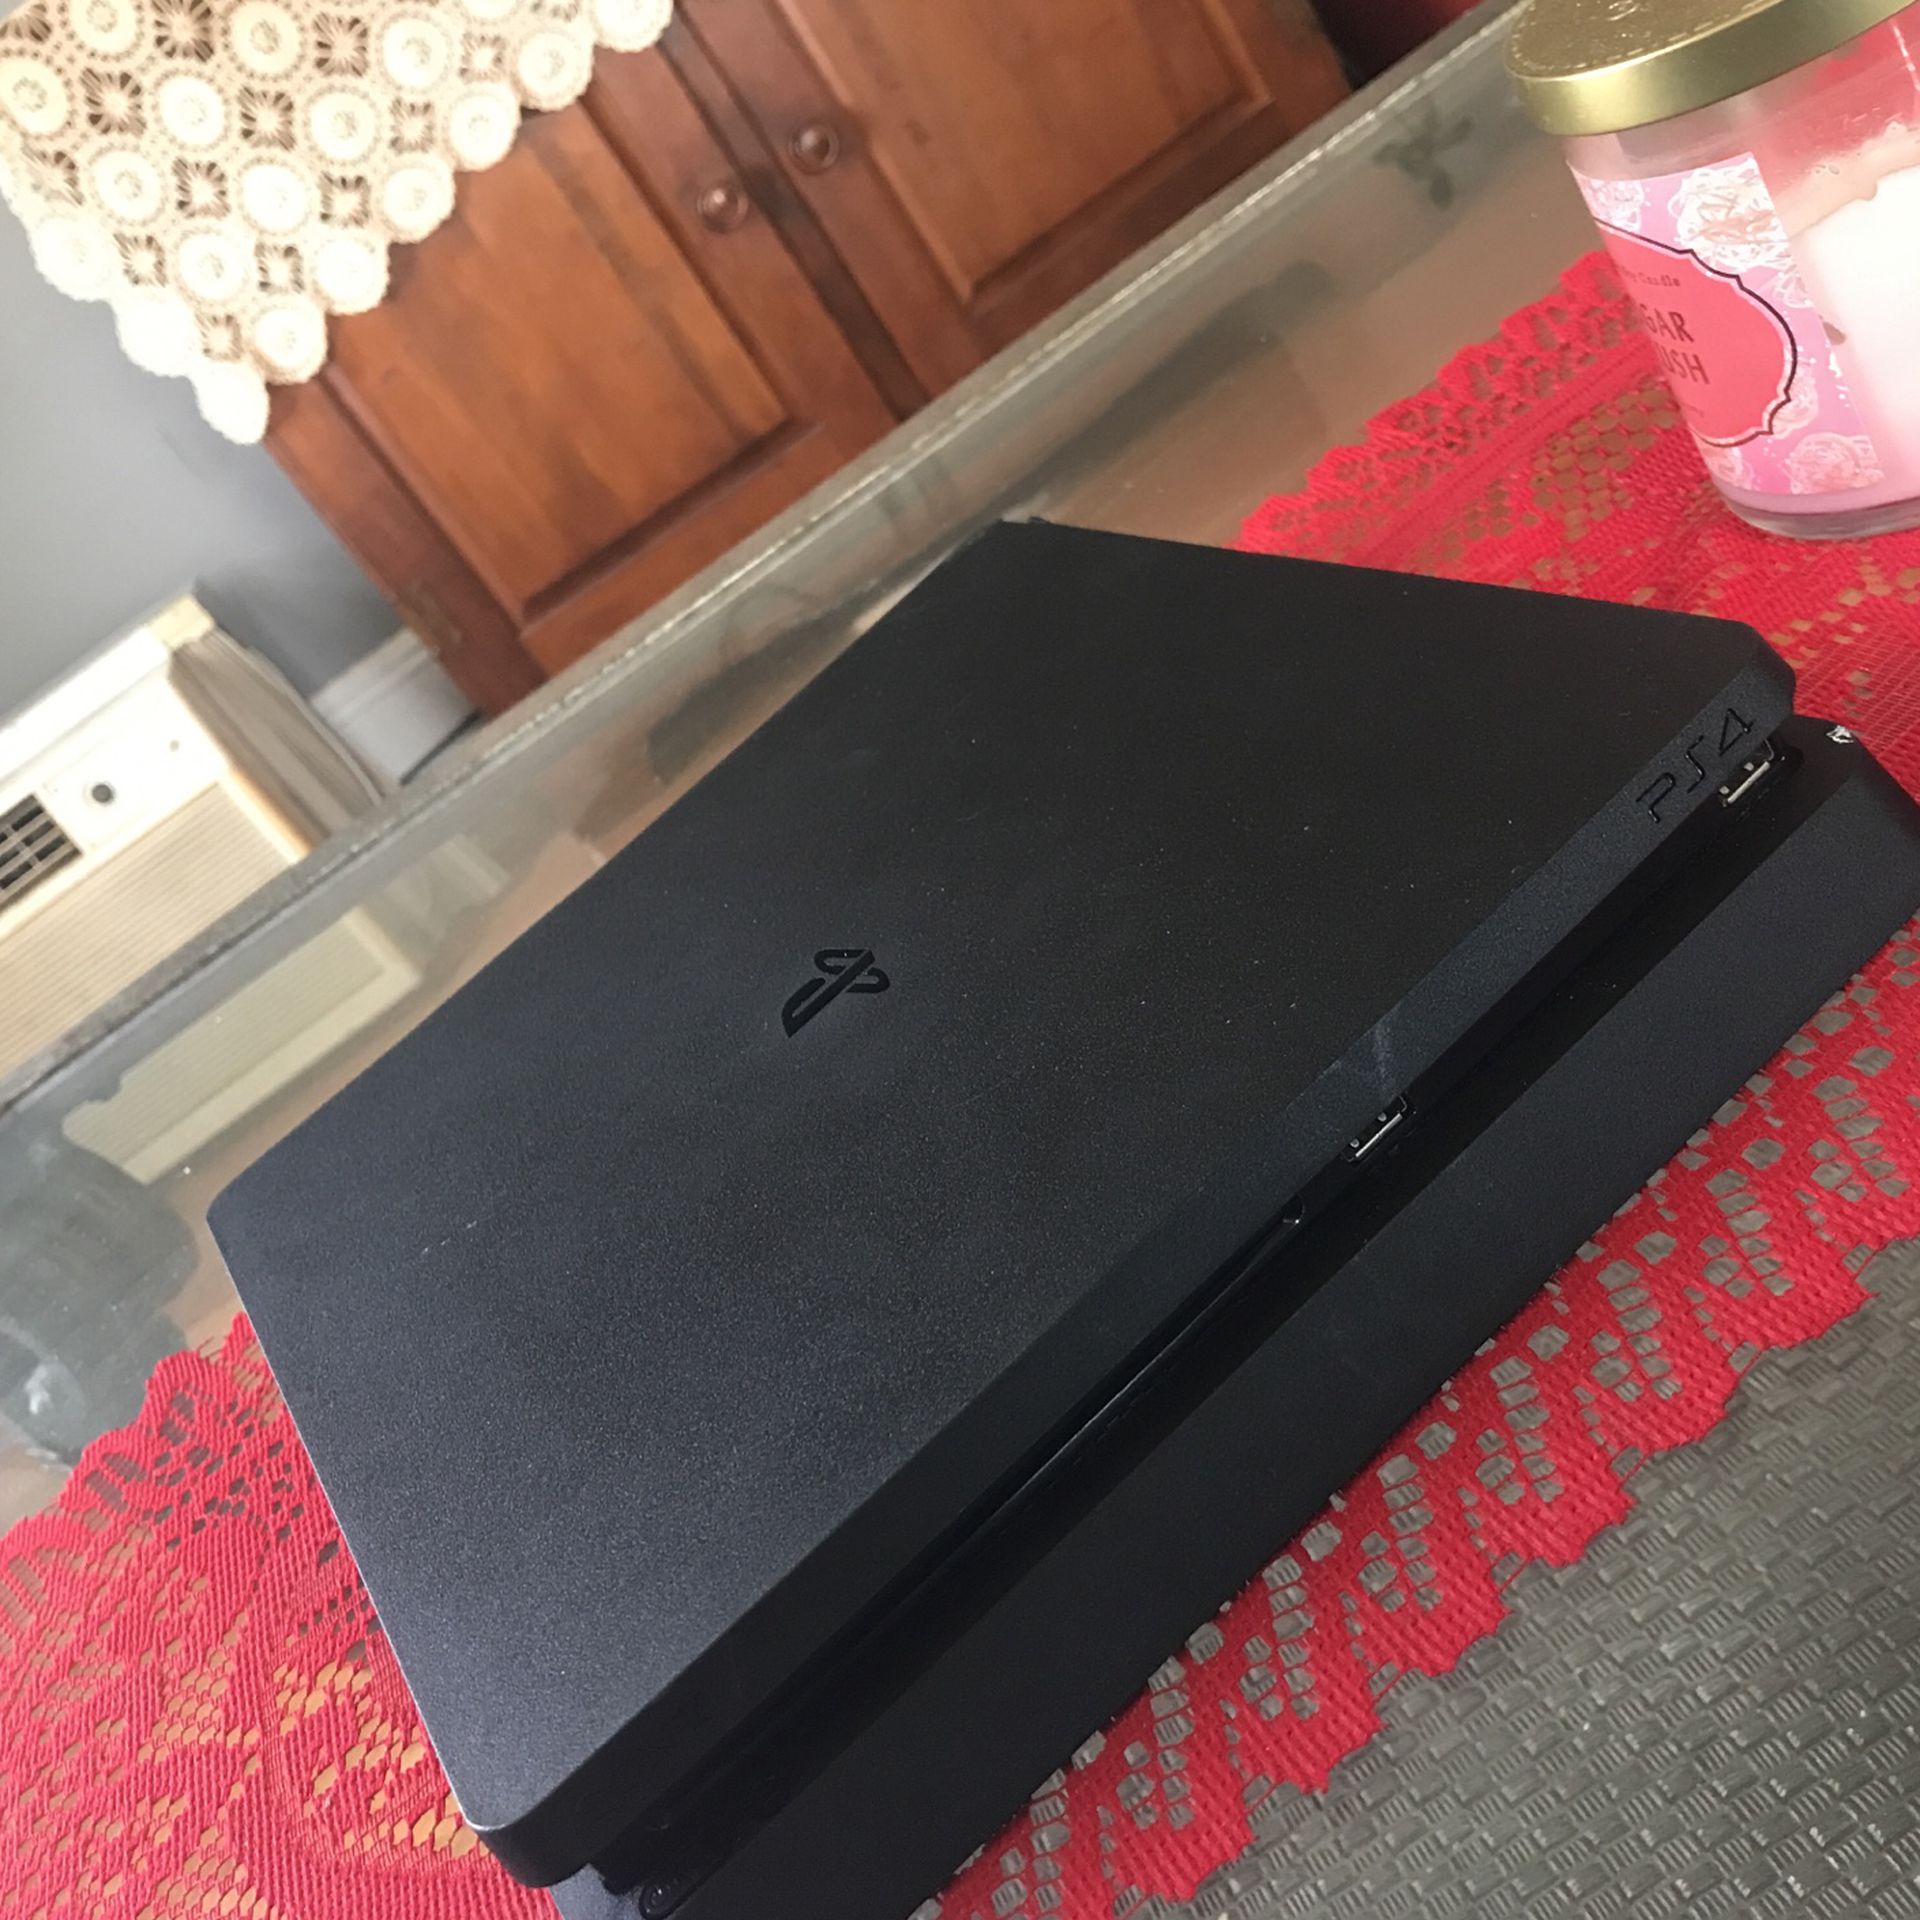 Ps4 7.02 Staying On Offer for in Branch, NJ - OfferUp